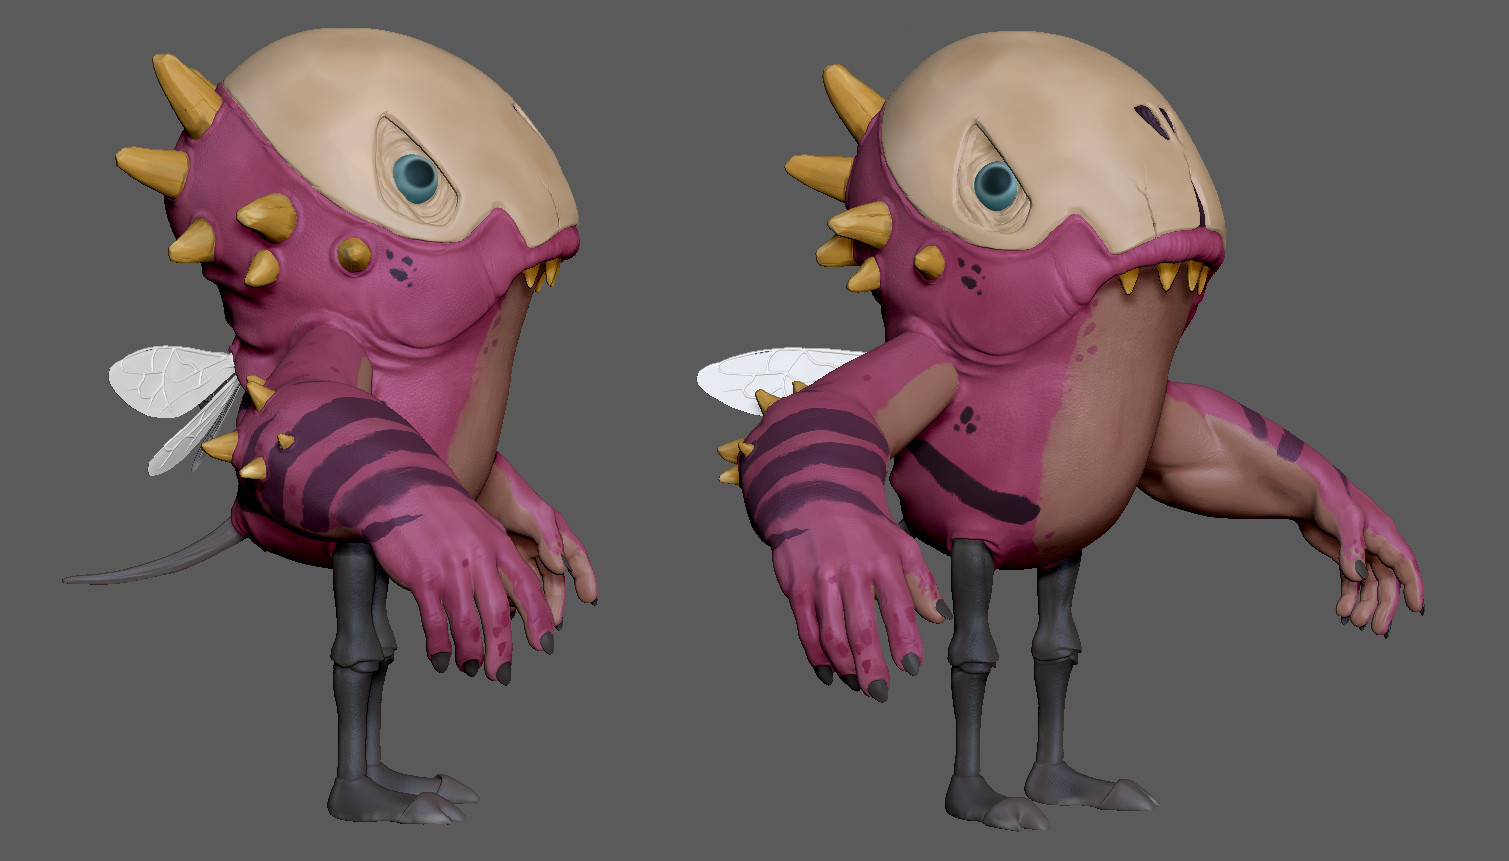 first phase of the polypaint it was white zbrush to see the result of the color